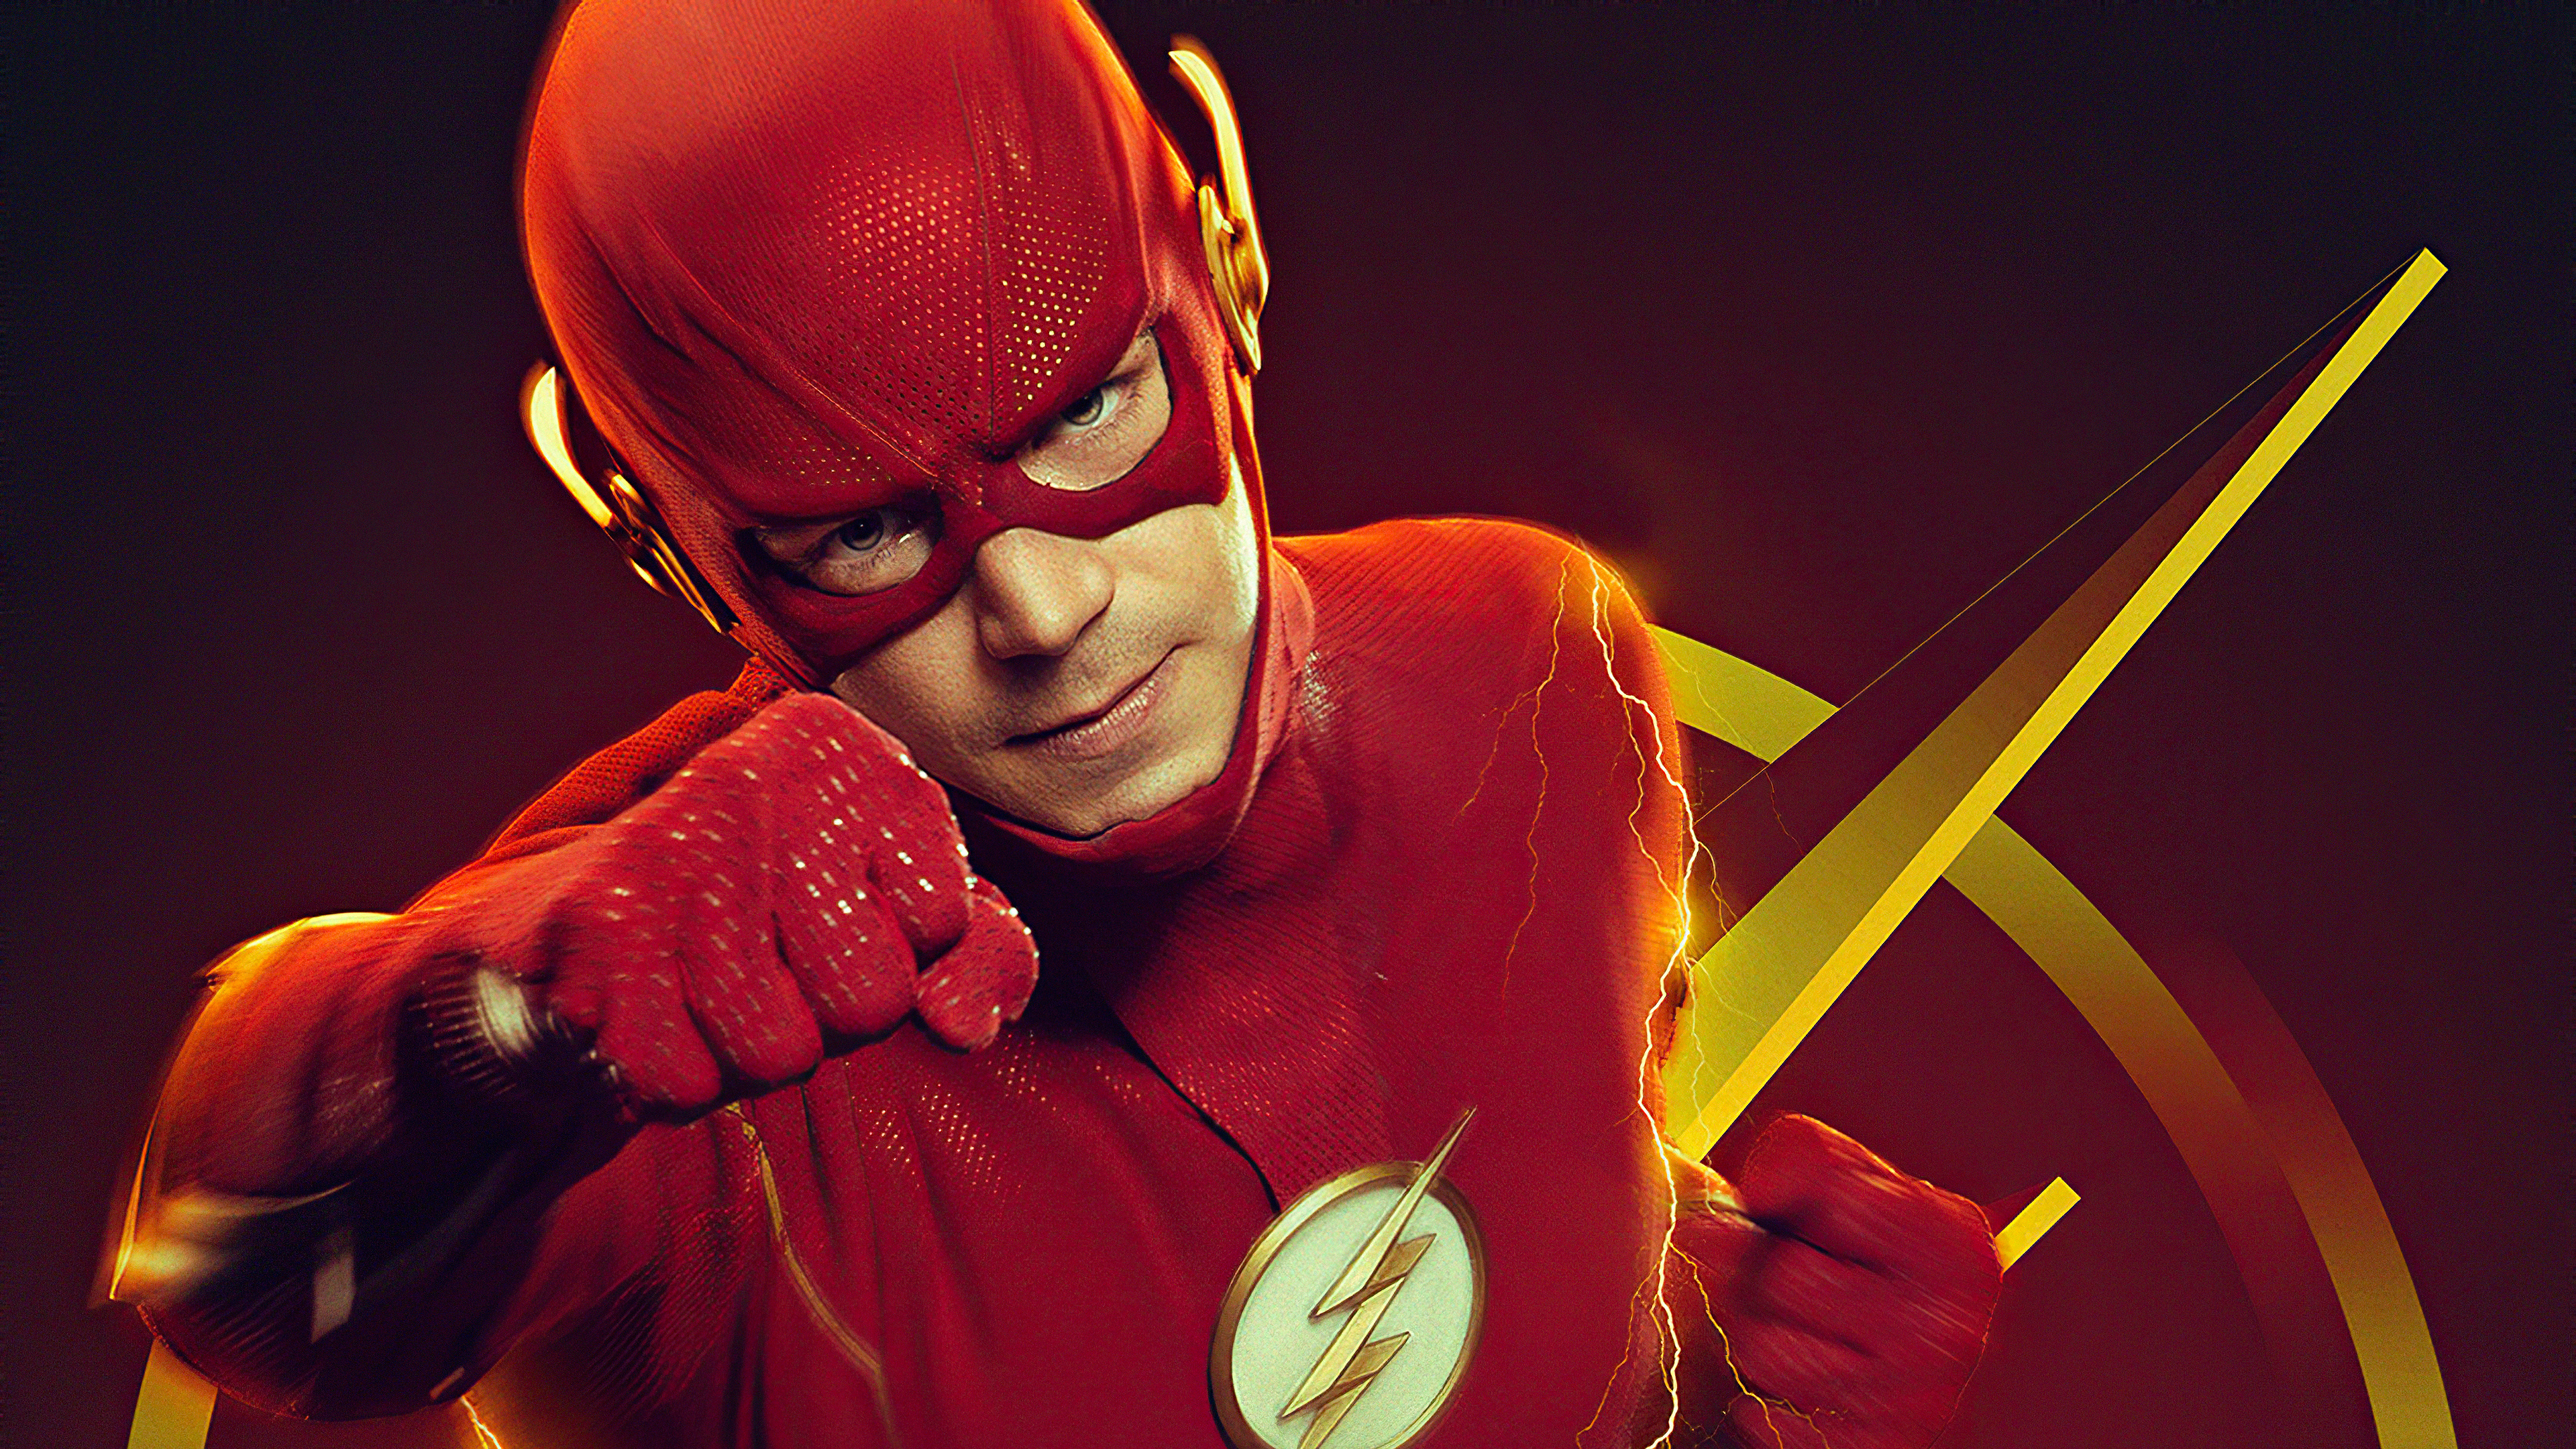 The Flash TV Series, Flash wallpapers, High-quality images, Fast-paced action, 3840x2160 4K Desktop